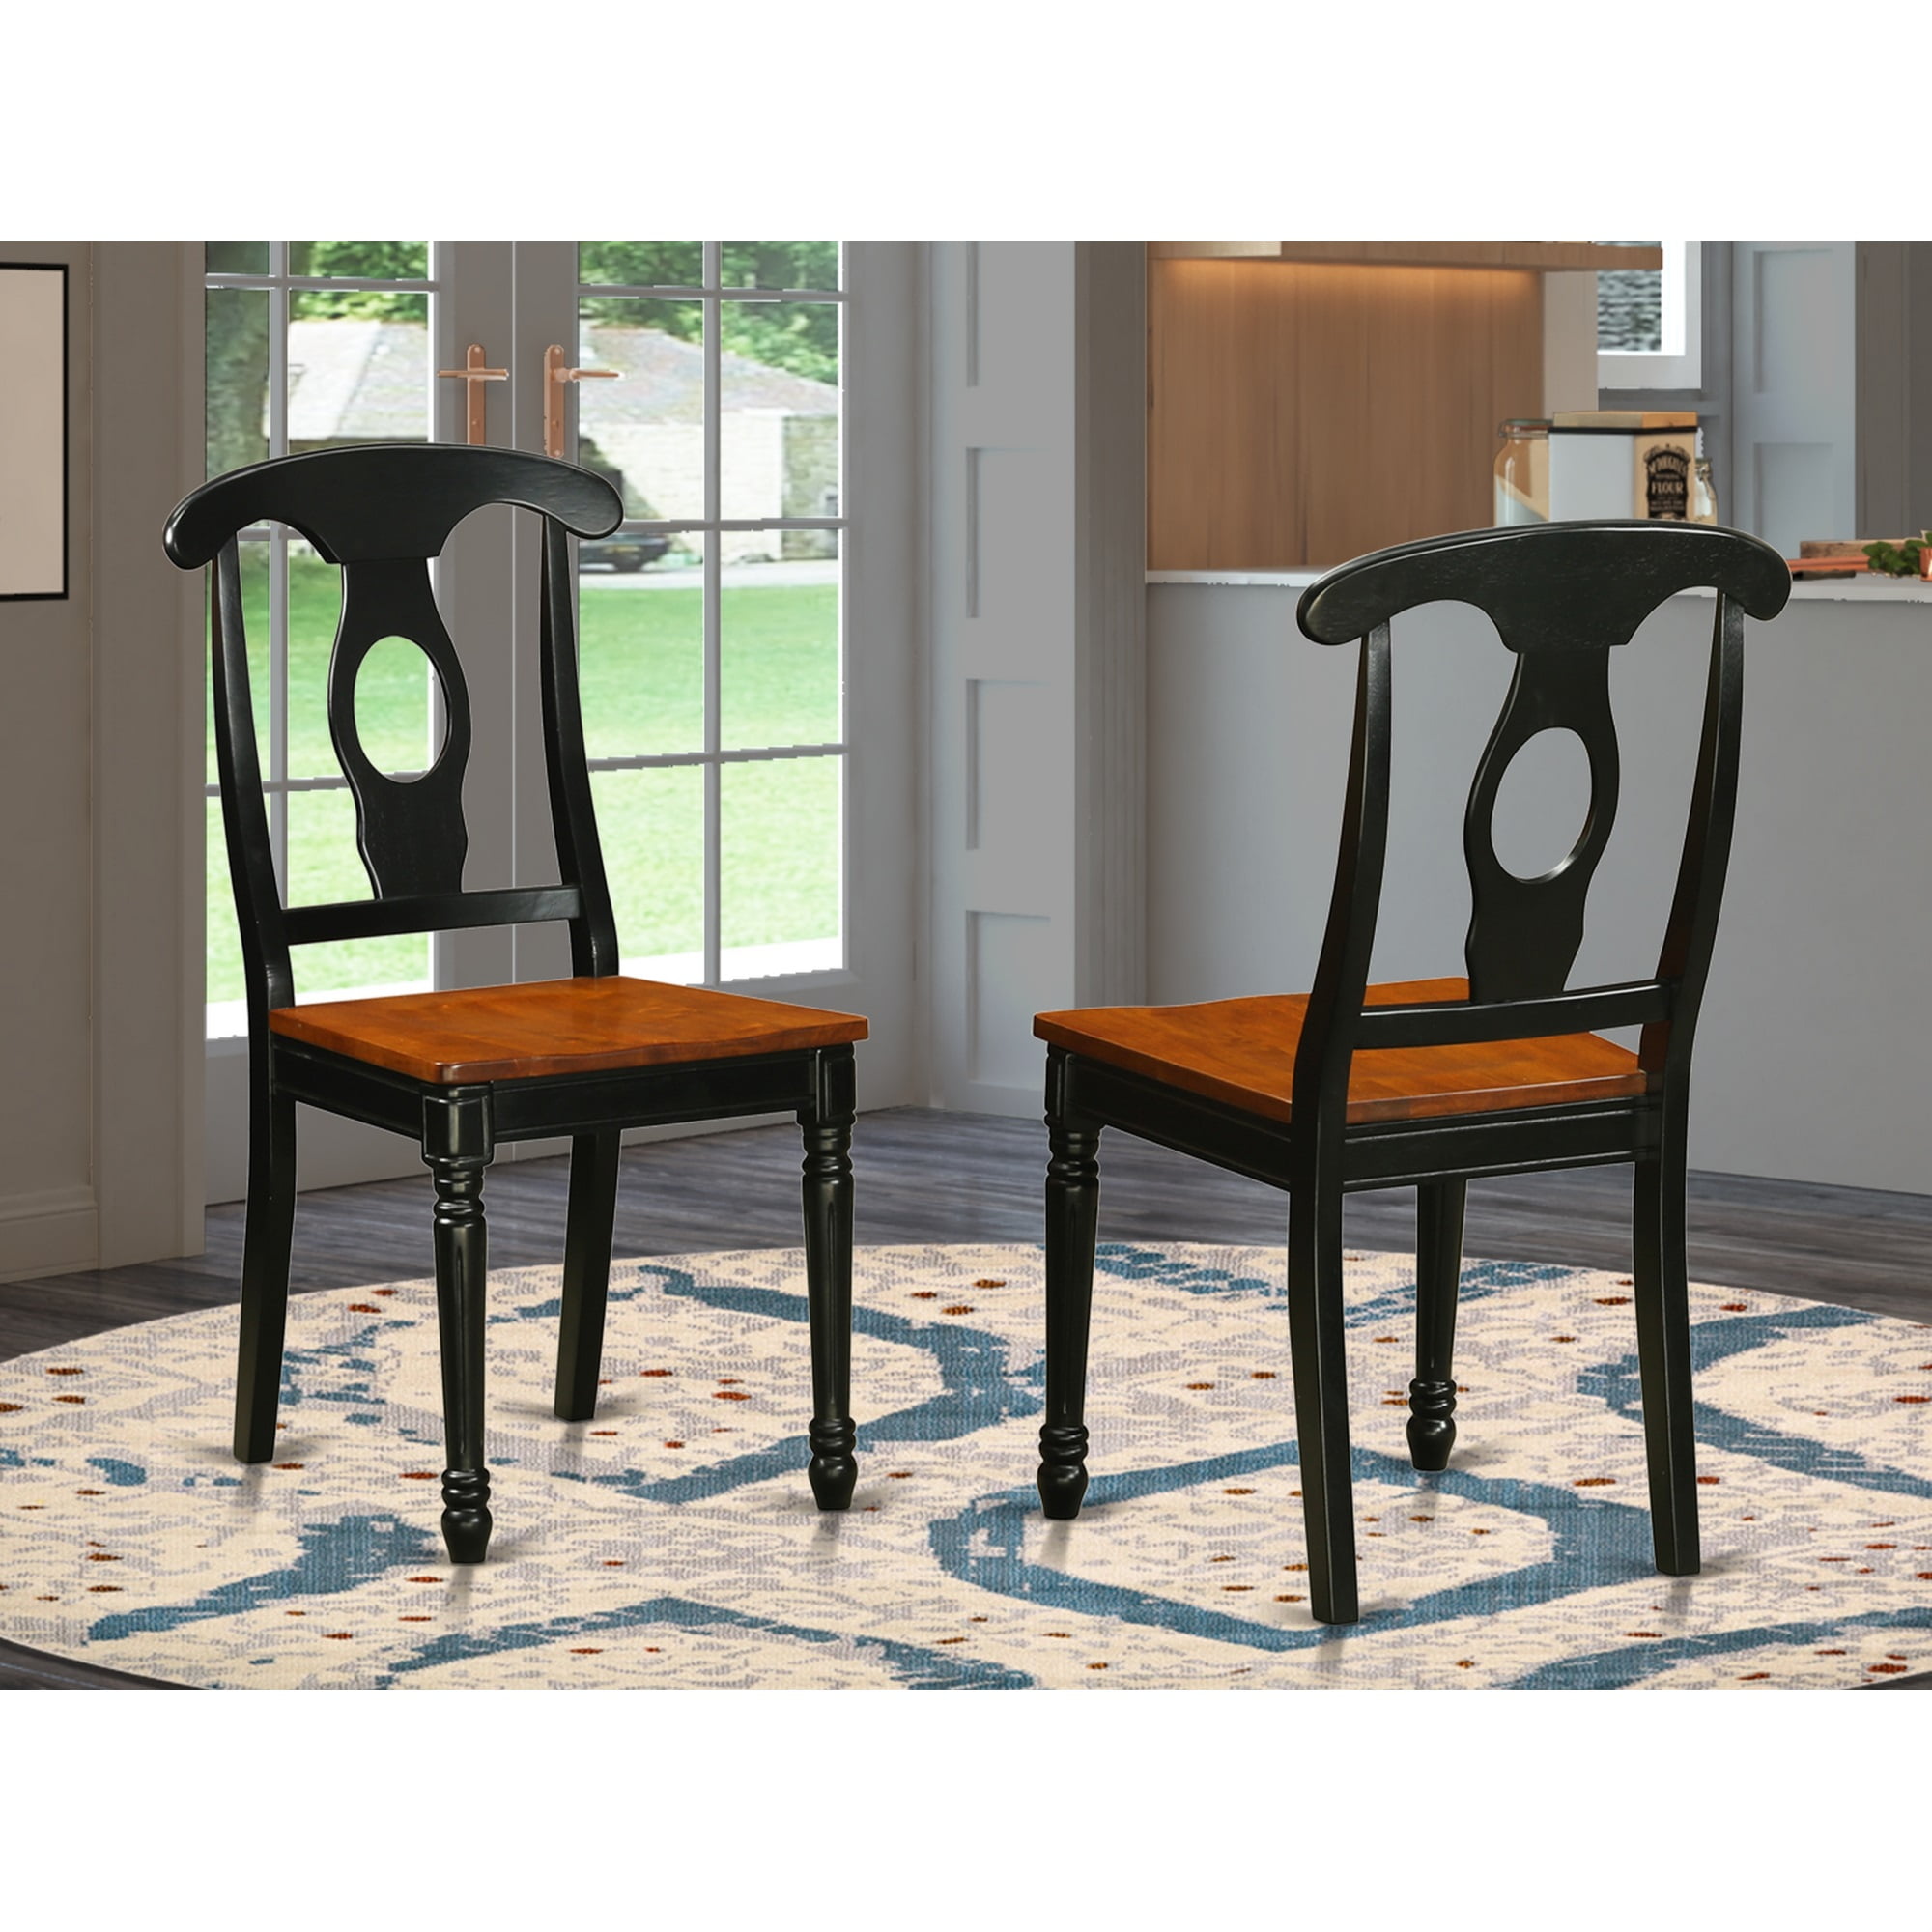 NAC-SBR-W Napoleon styled chair with wood seat Set of